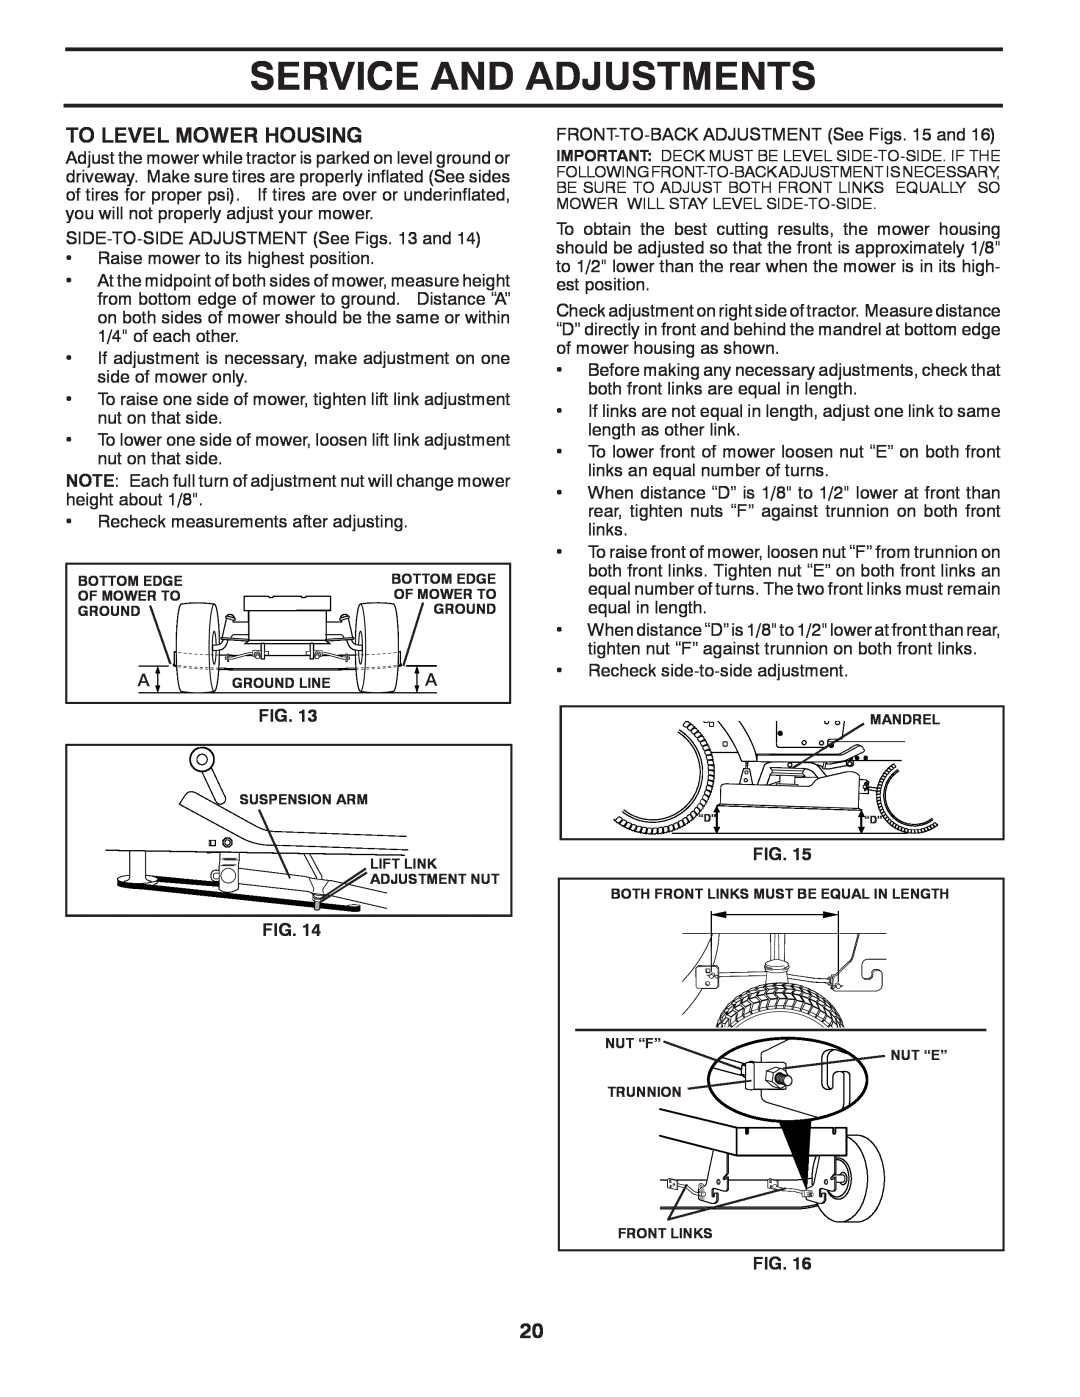 Poulan 425001 manual To Level Mower Housing, Service And Adjustments 